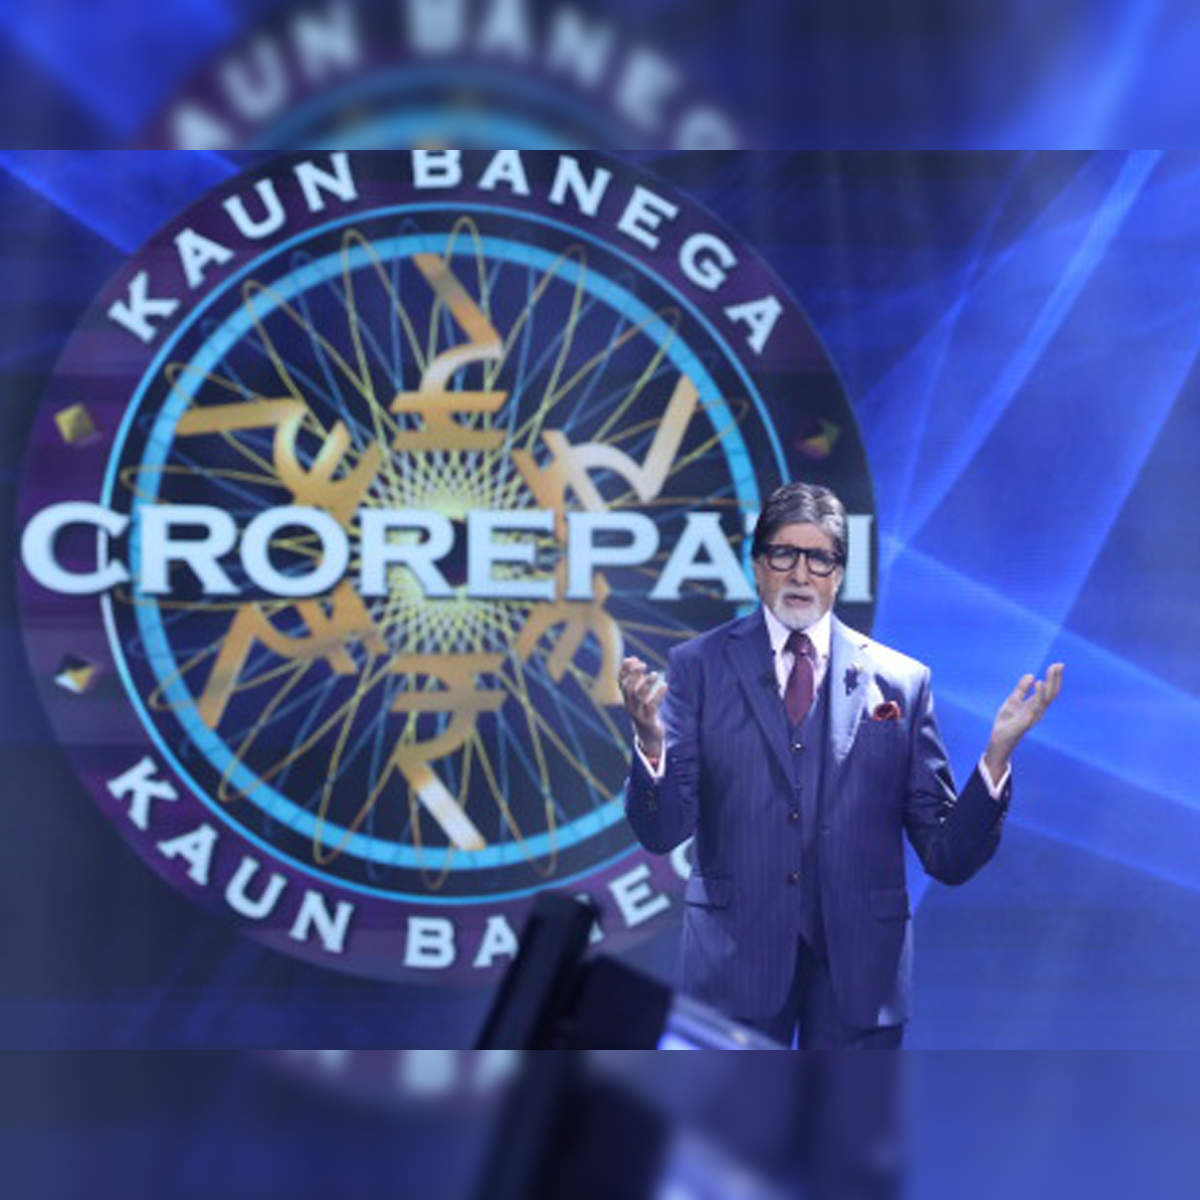 Kaun Banega Crorepati | Sony LIV | Register Now | Kaun Banega Crorepati,  nature, mobile app | #Bhupendra ji's happy-go-lucky nature on the KBC stage  is contagious! Tune into KBC on Sony